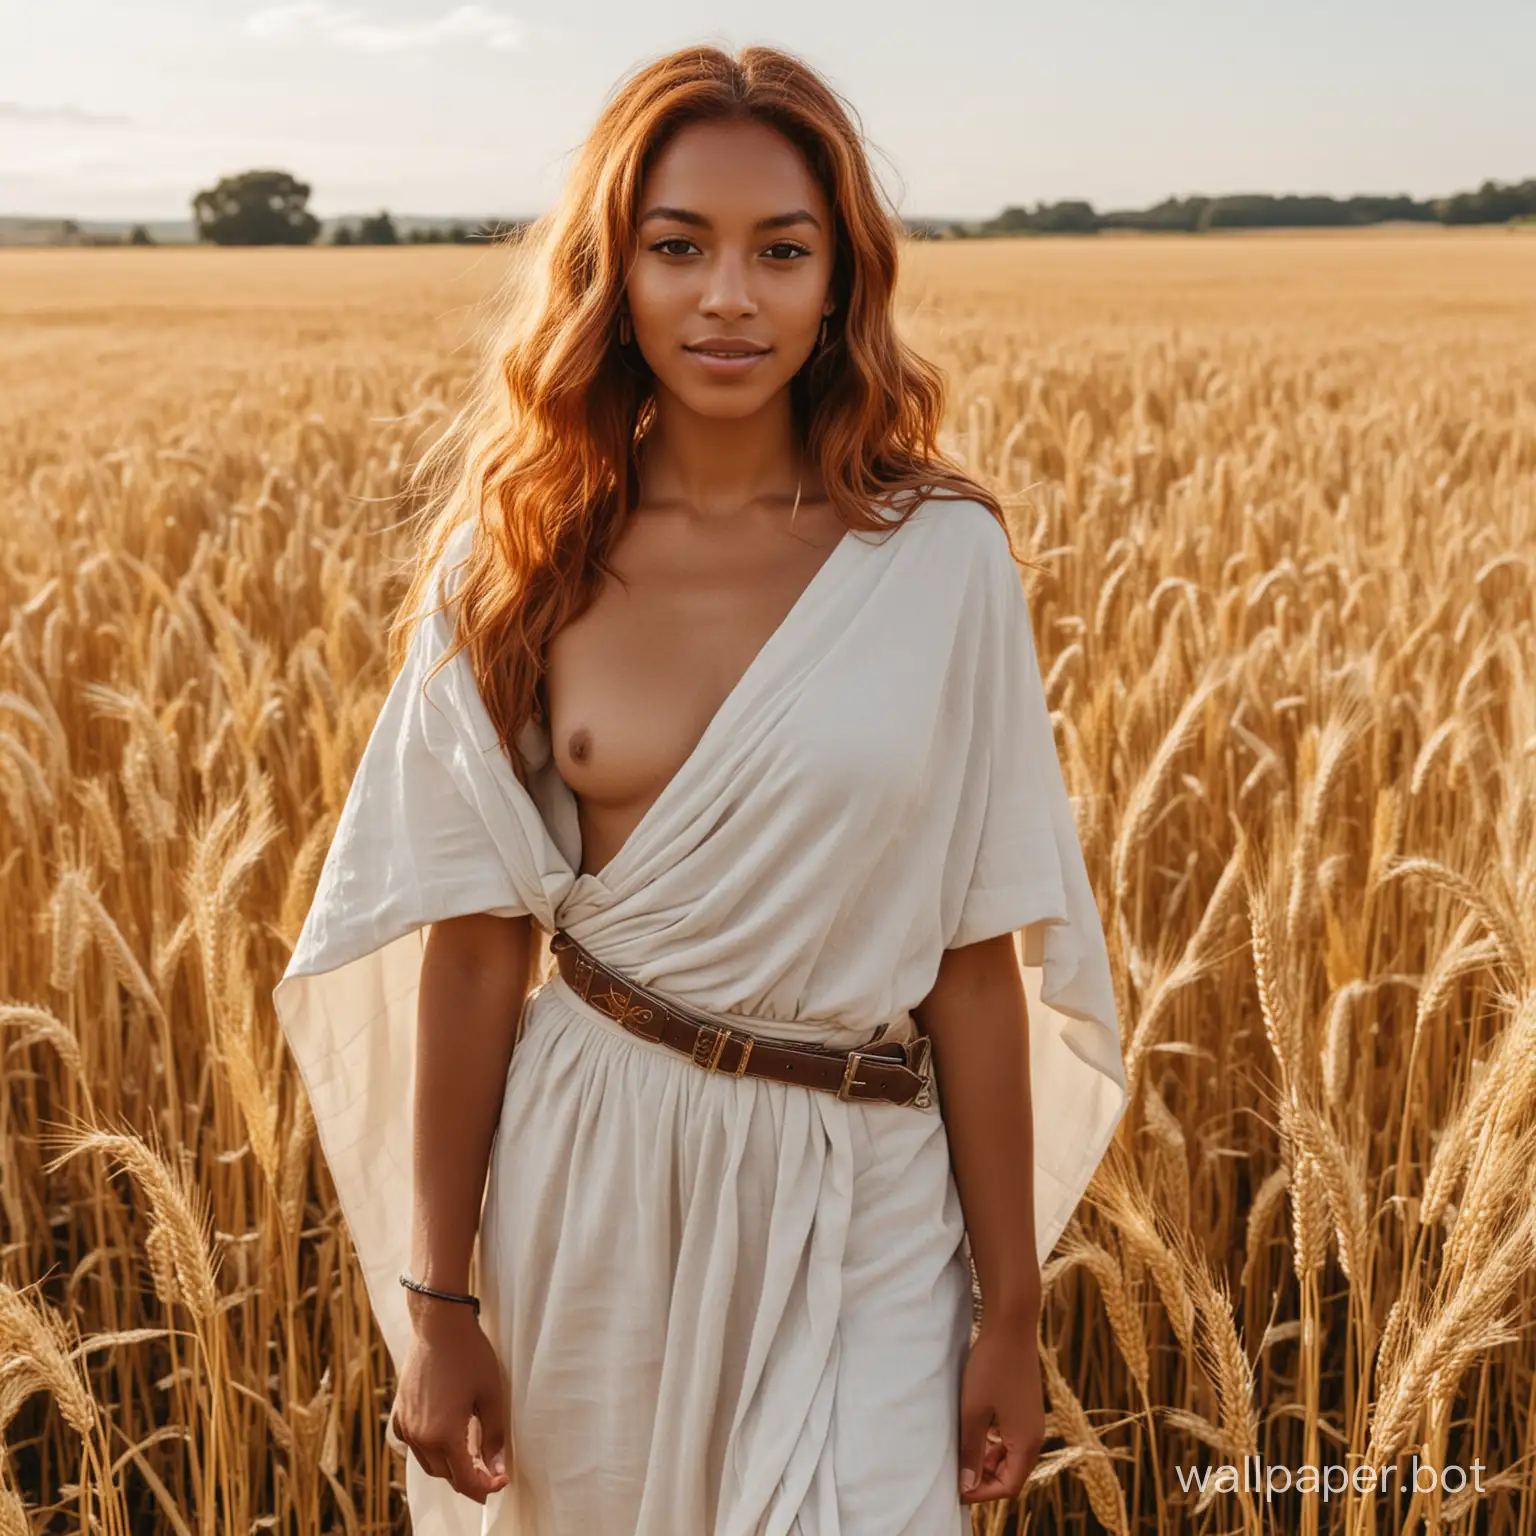 A brown skin girl with long ginger hair standing wearing a toga with a buckle in a golden wheat field